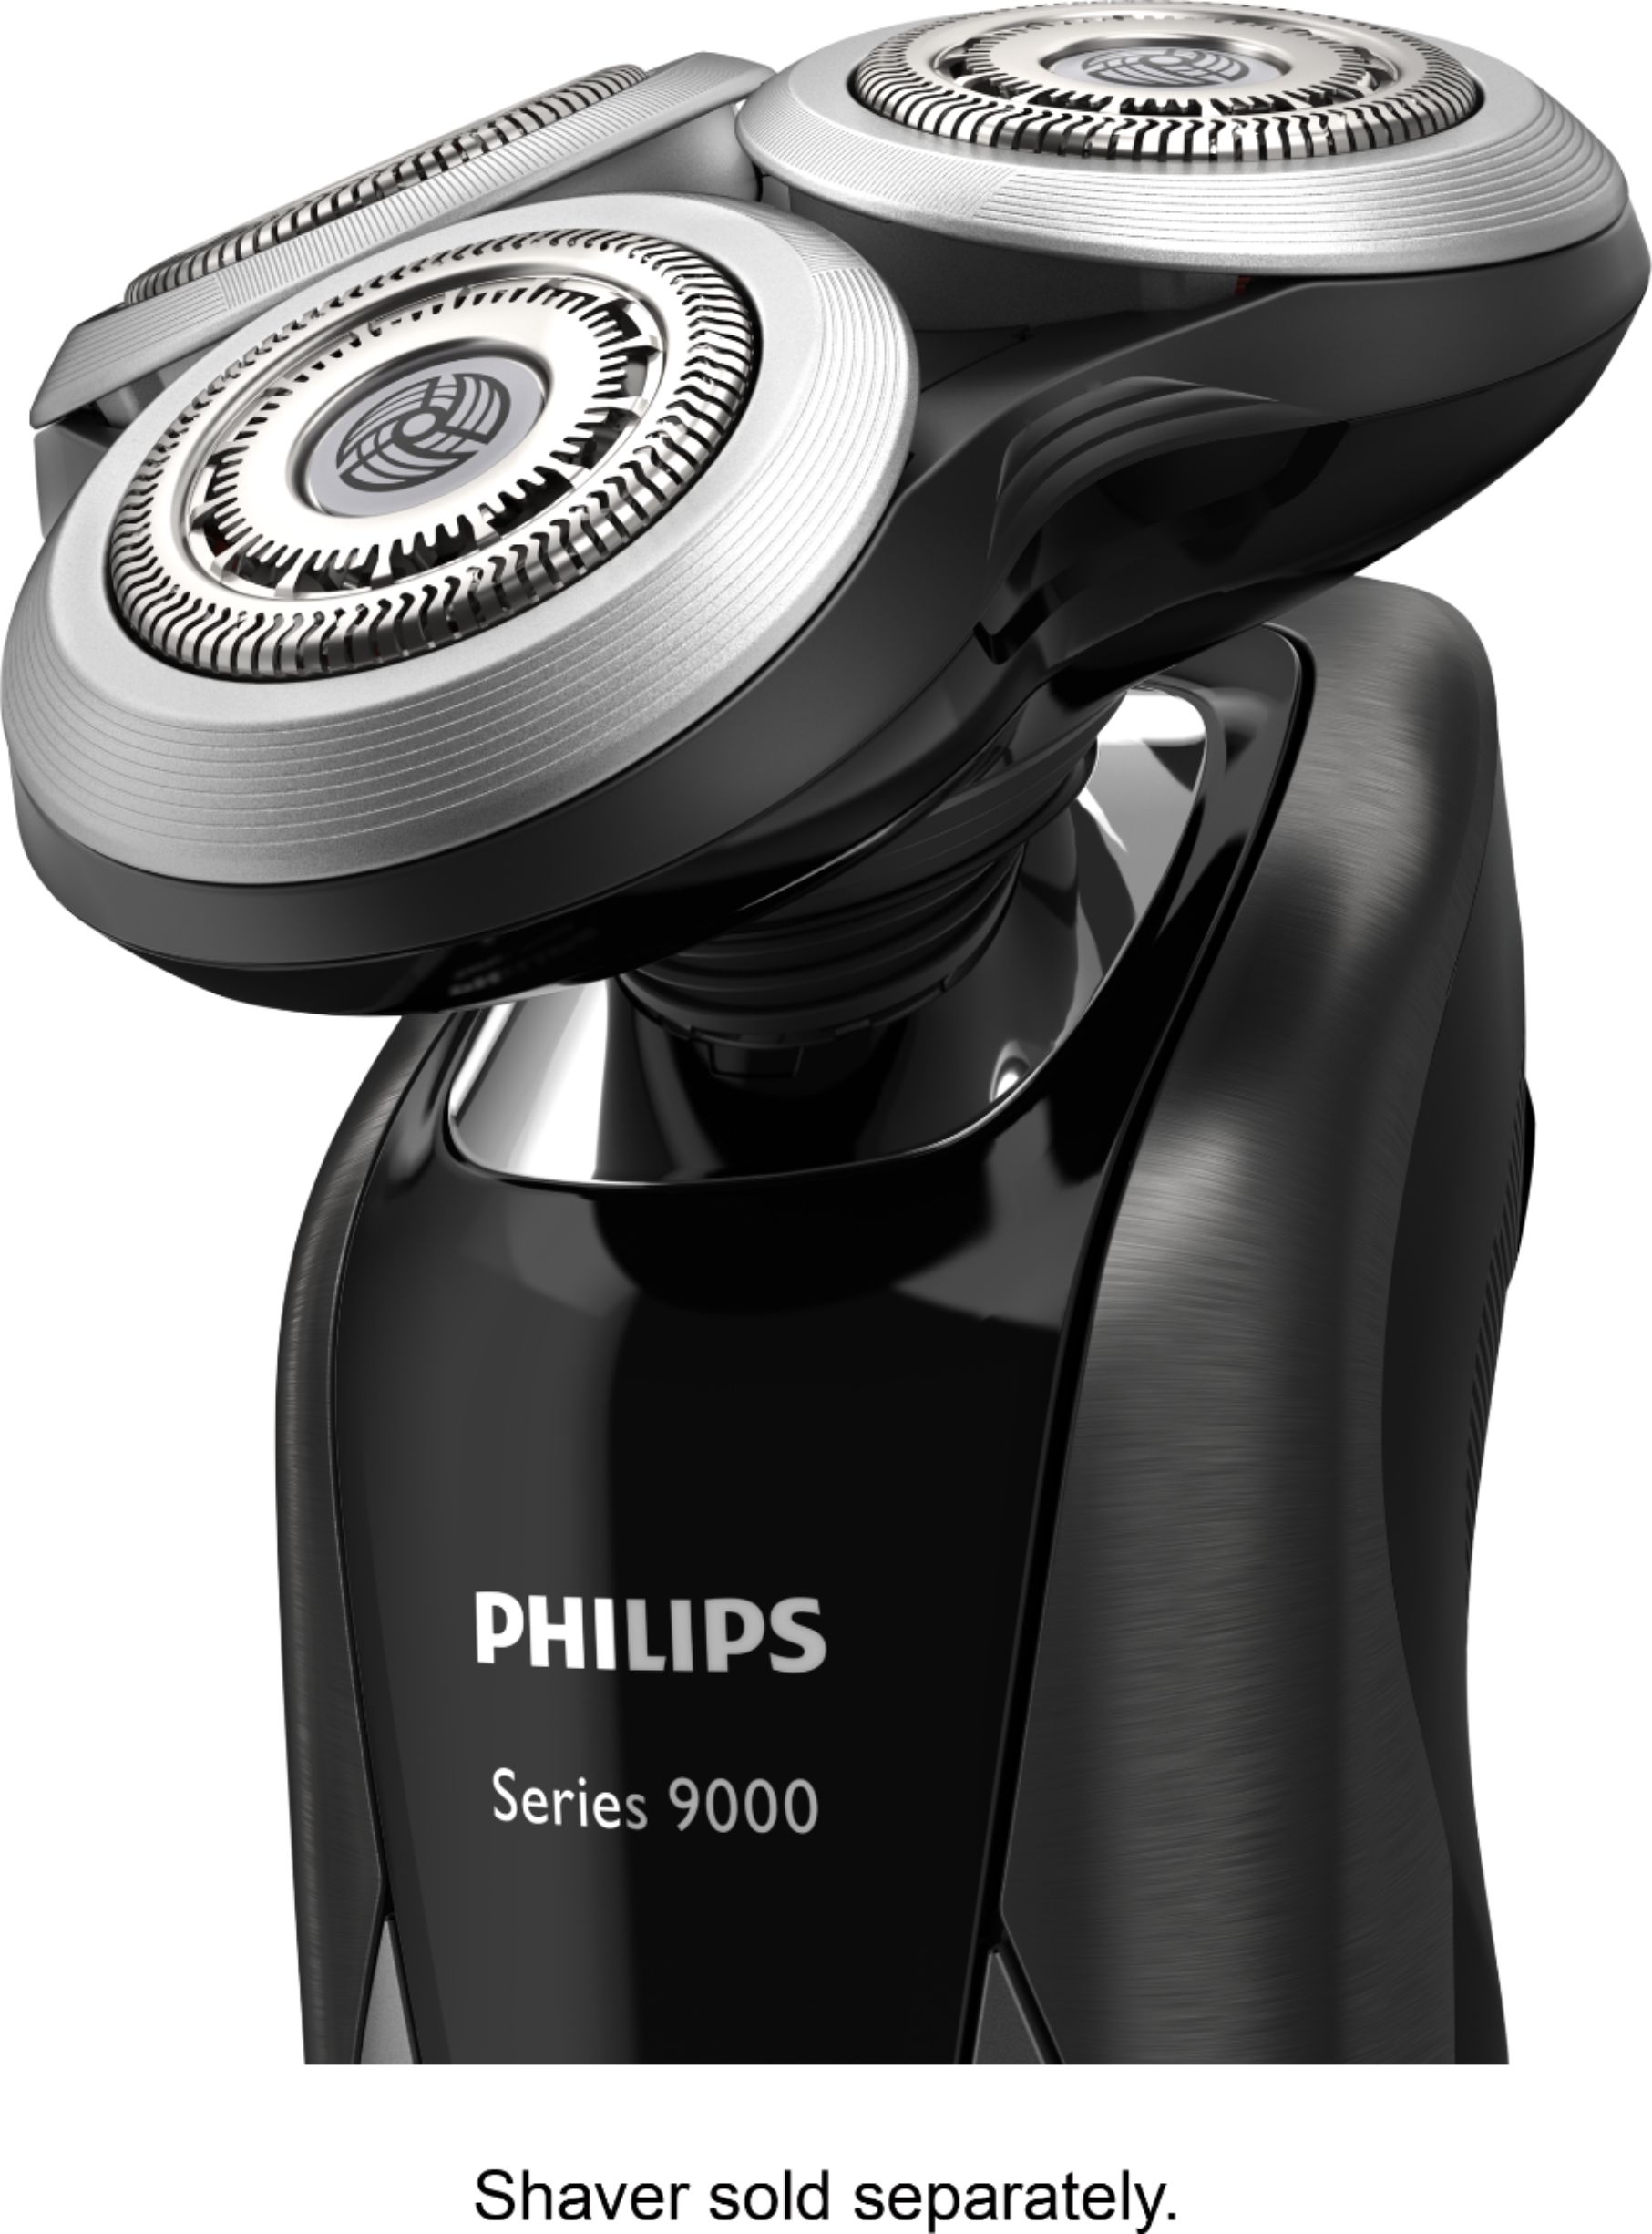 Customer Reviews Replacement Shaving Heads For Philips Norelco Series 9000 Electric Shavers